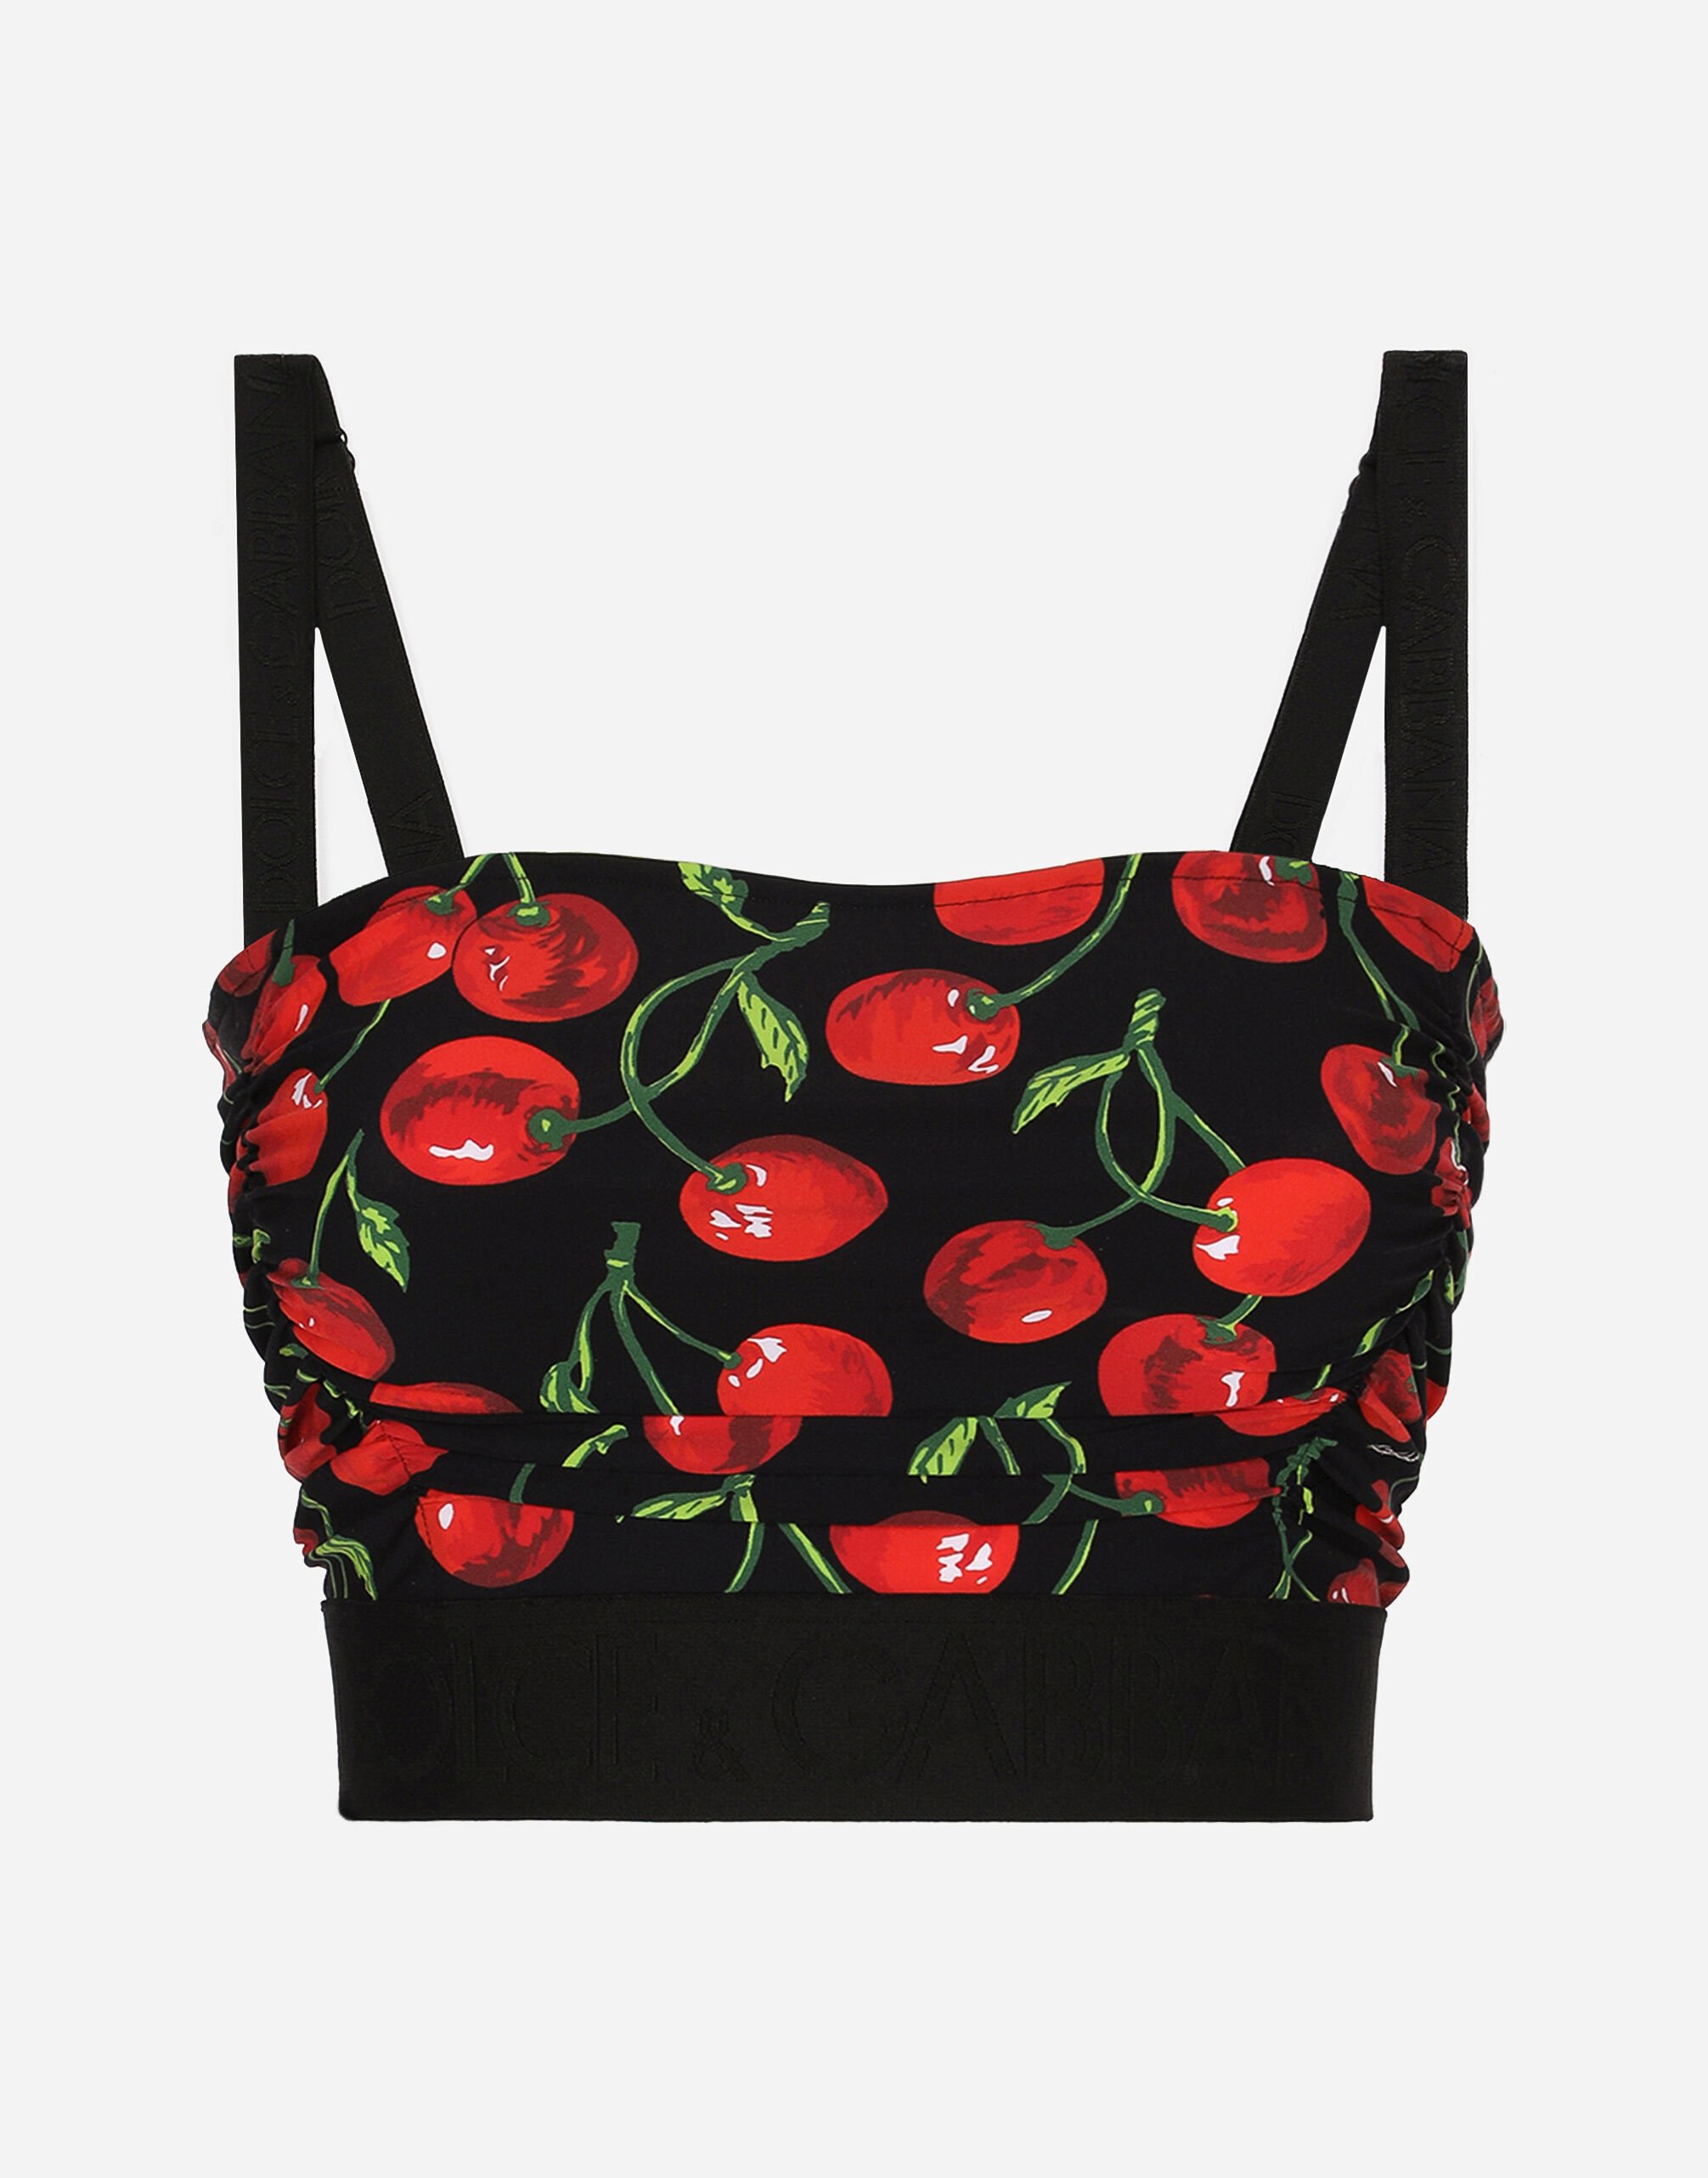 Dolce & Gabbana Cherry-print technical jersey top with straps Black VG6186VN187